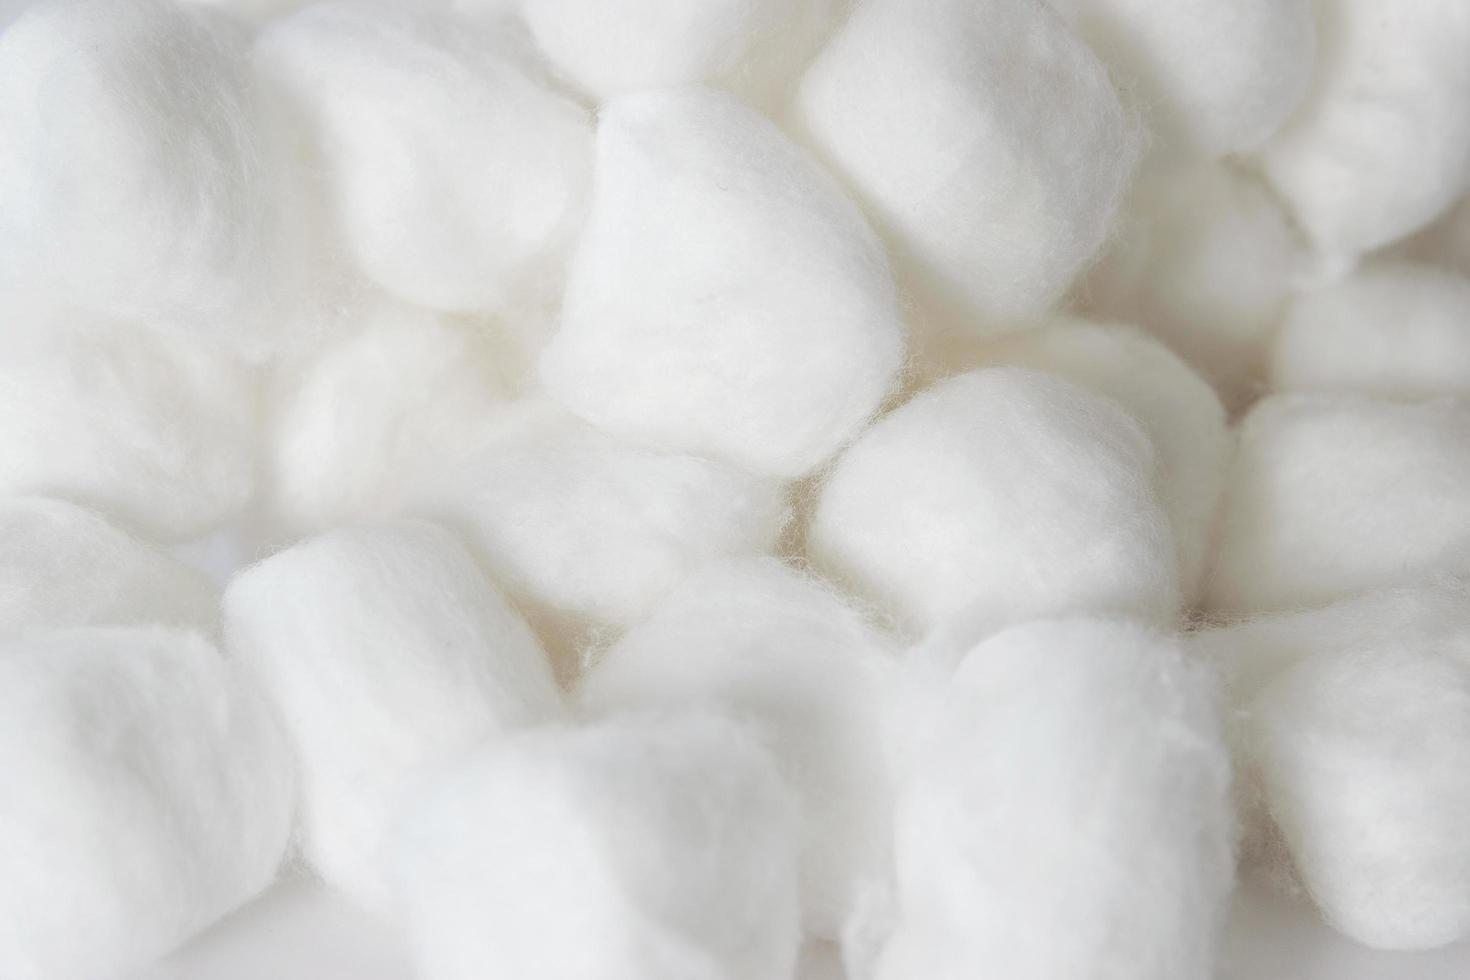 Cotton balls Free Stock Photos, Images, and Pictures of Cotton balls